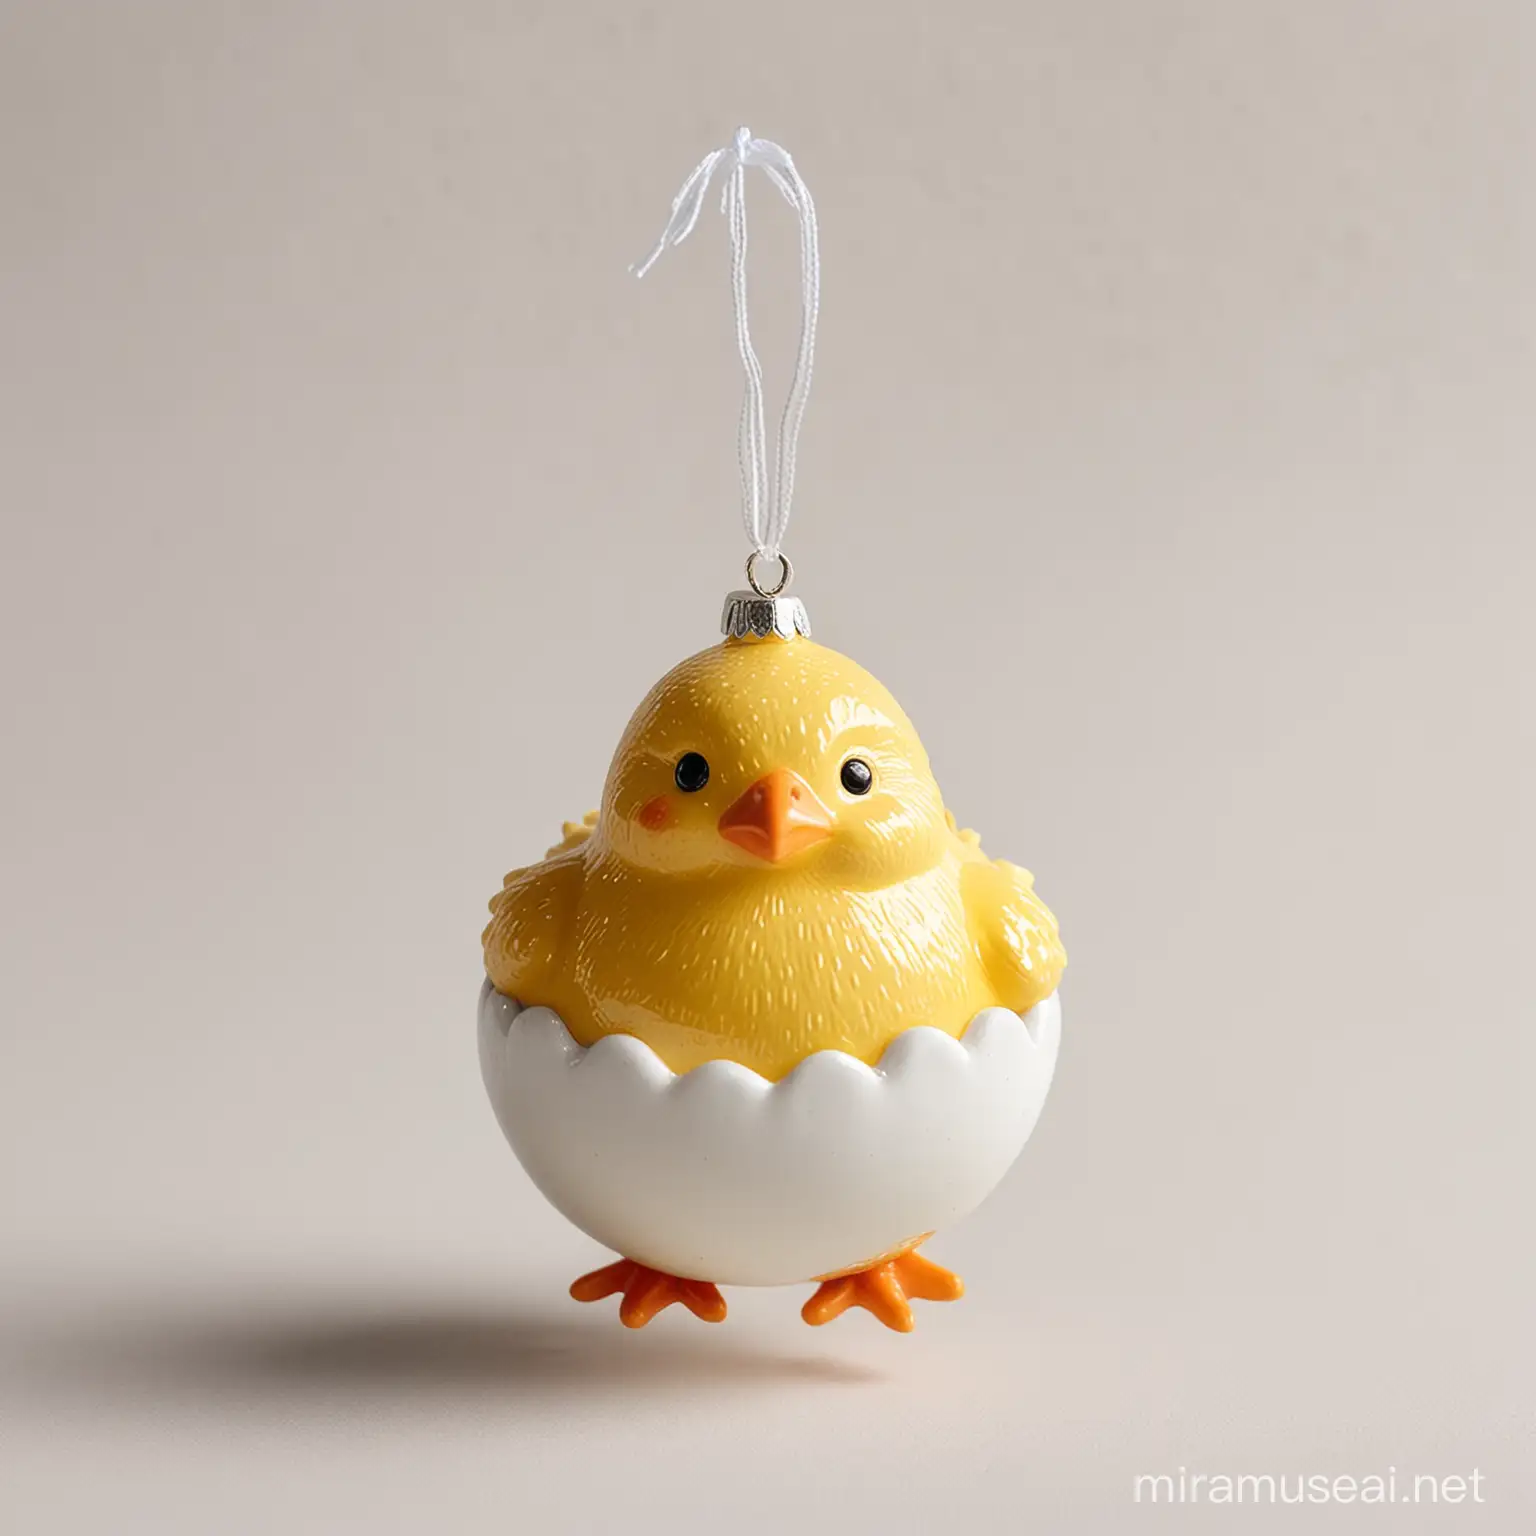 Adorable Easter Chick Ceramic Ornaments on White Background